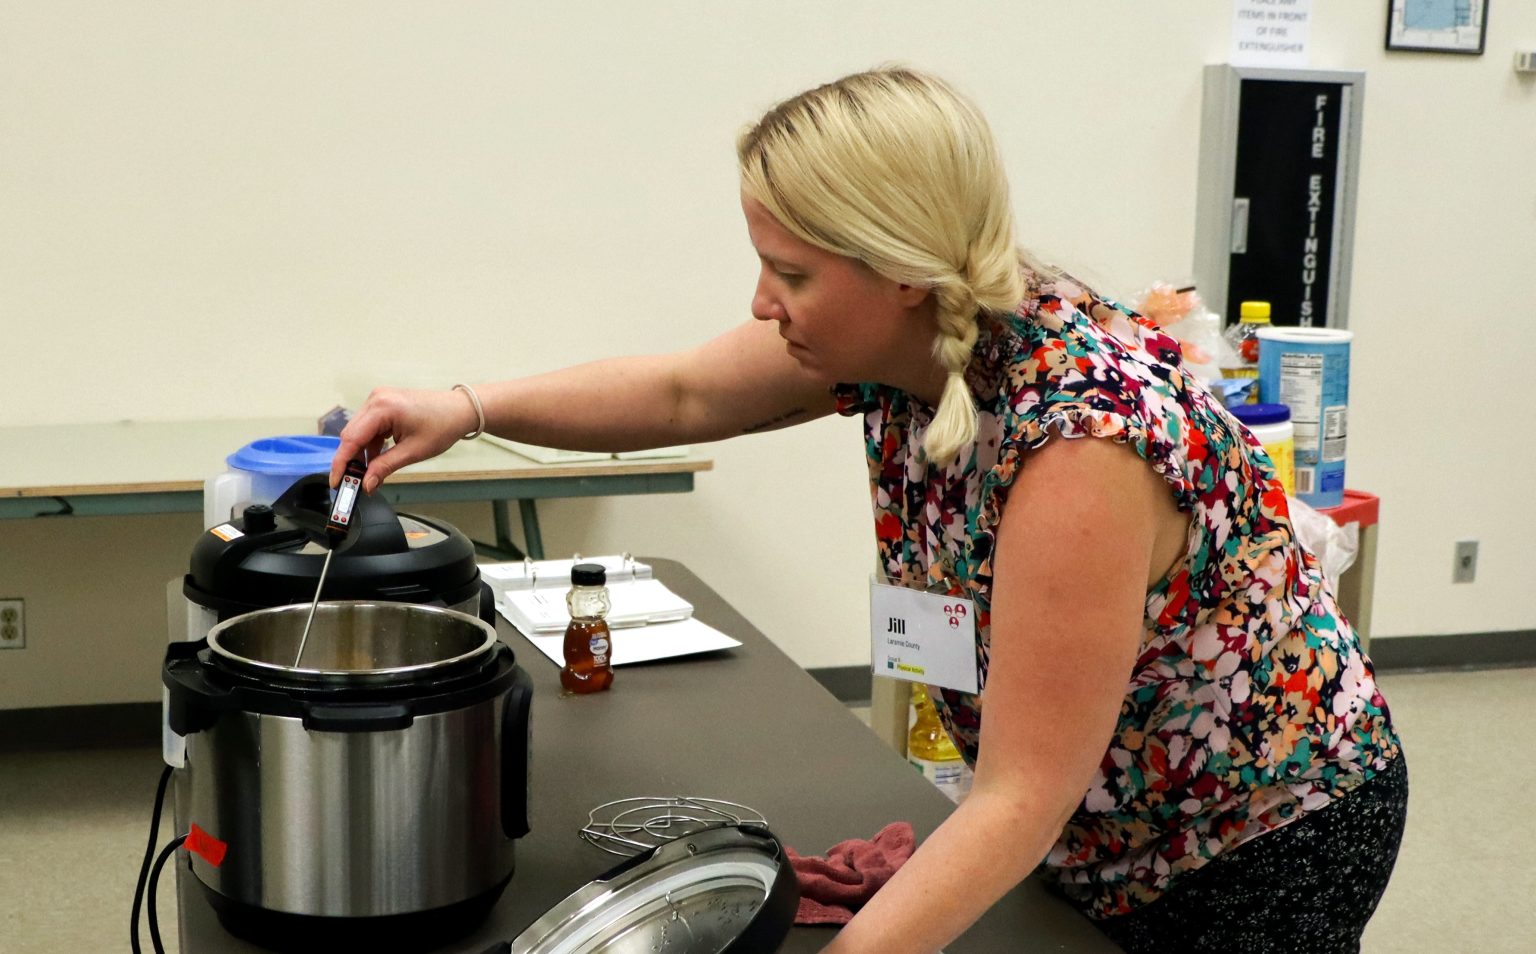 blond woman wearing floral shirt and name tag that says Jill holds an Instant Pot lid in one hand and sticks a food thermometer into the electric pressure cooker with the other hand